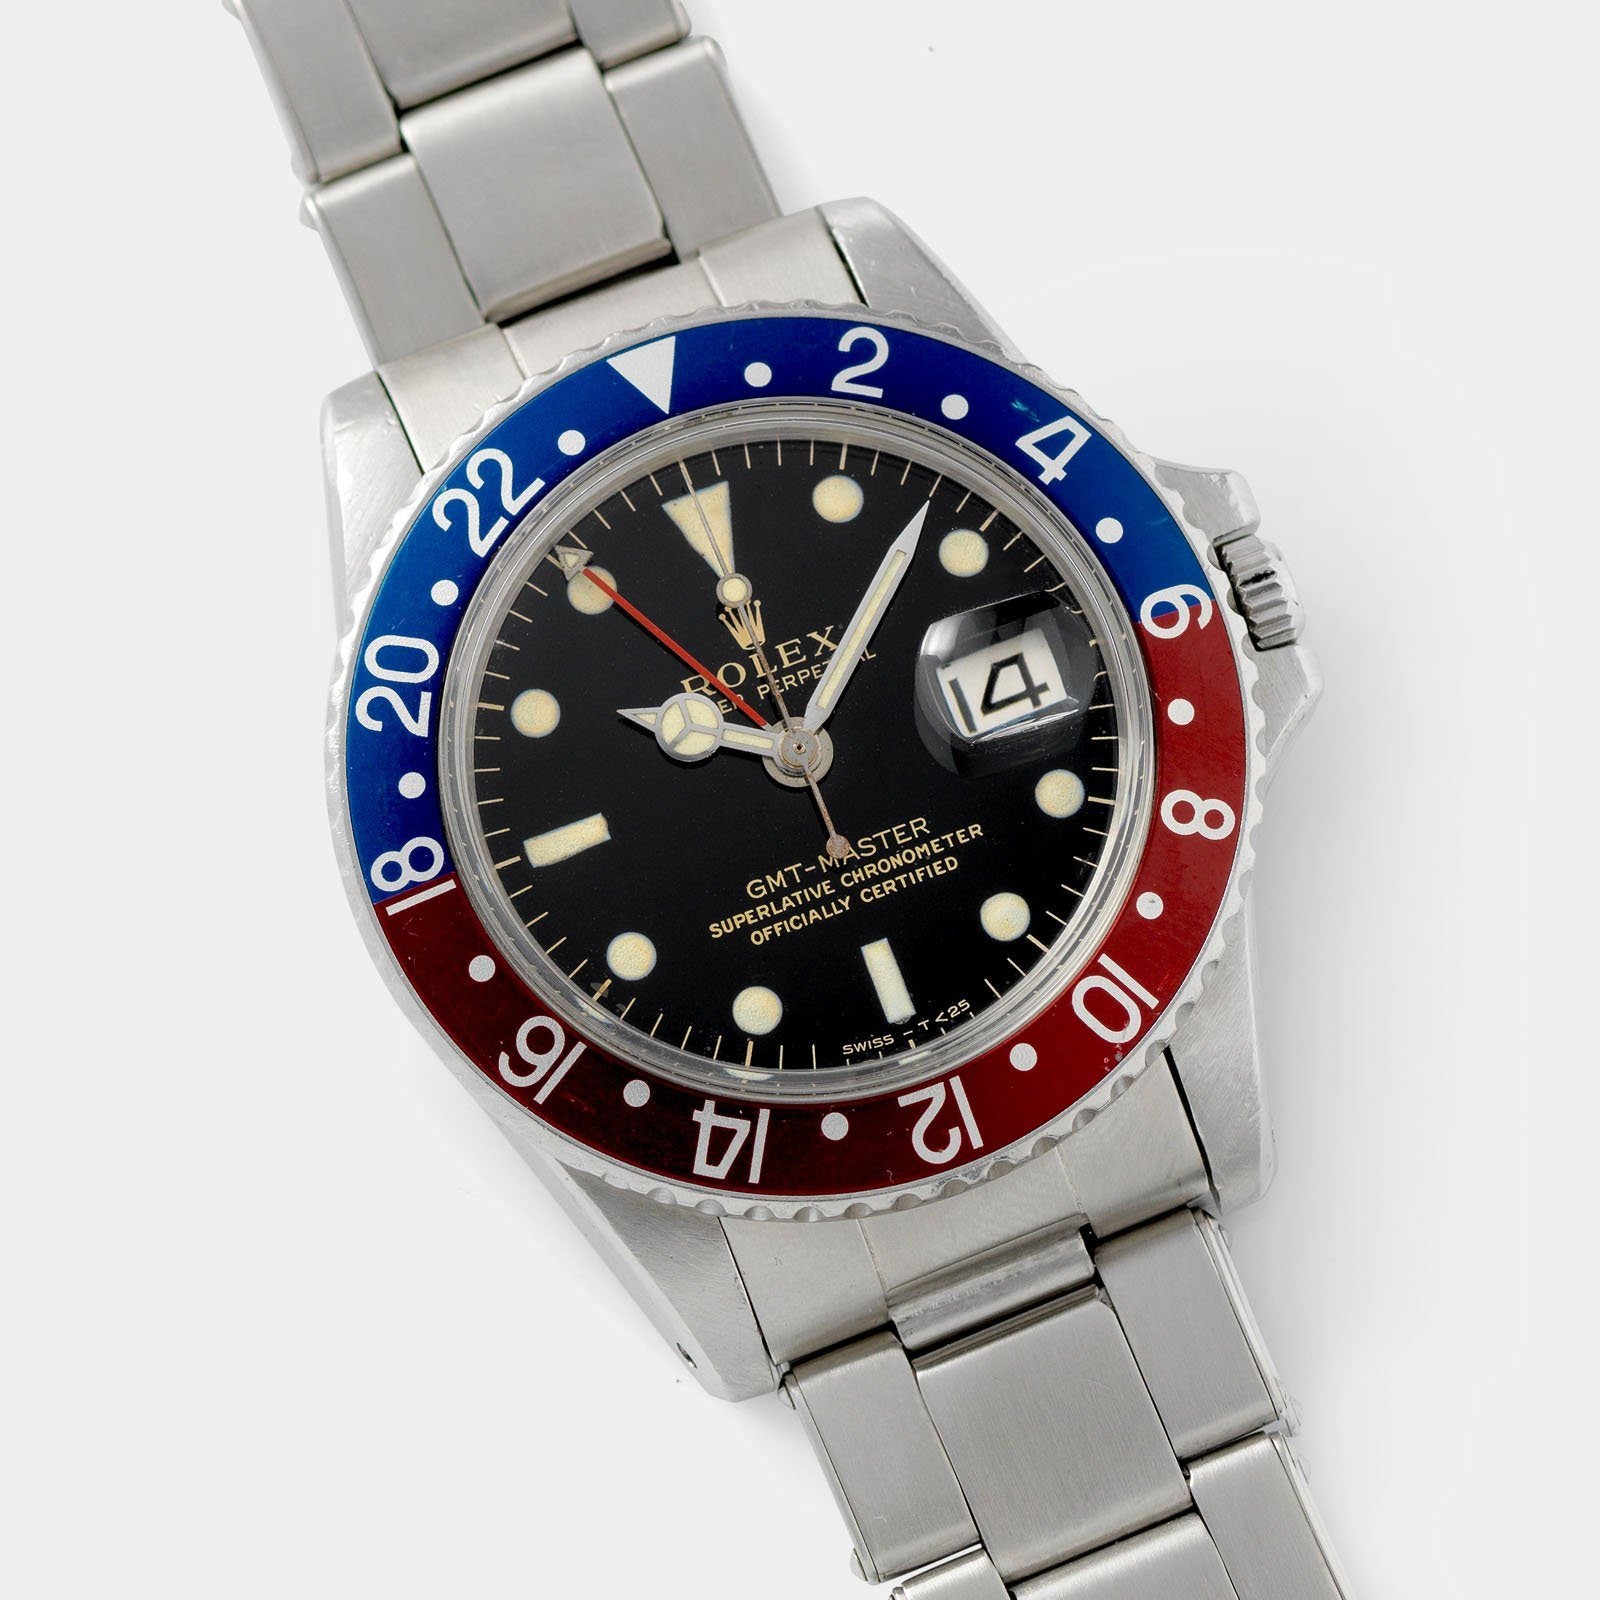 Rolex 1675 Gilt Dial GMT Master Small Hand 40mm steel case